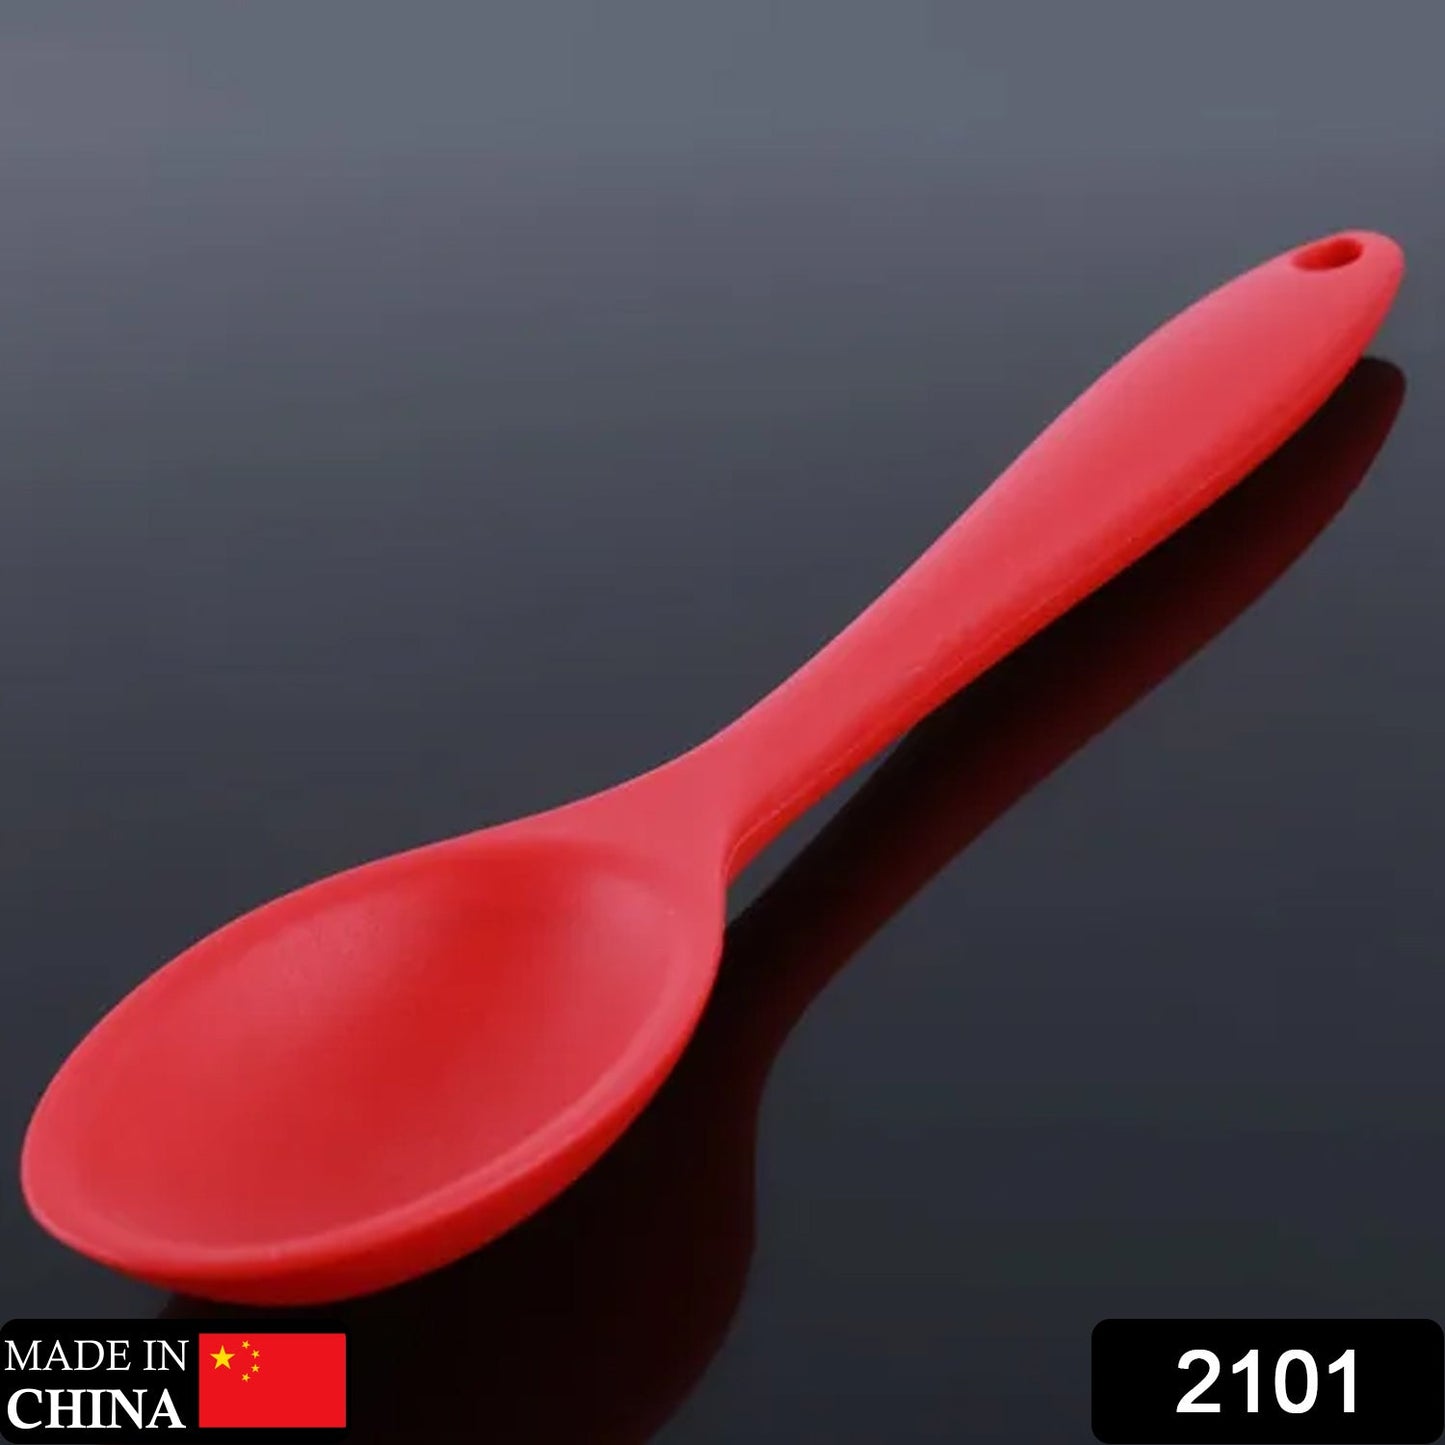 2101 Non-Stick Small Silicone Stainless Steel with Silicone Coating Spatula spoon. DukanDaily